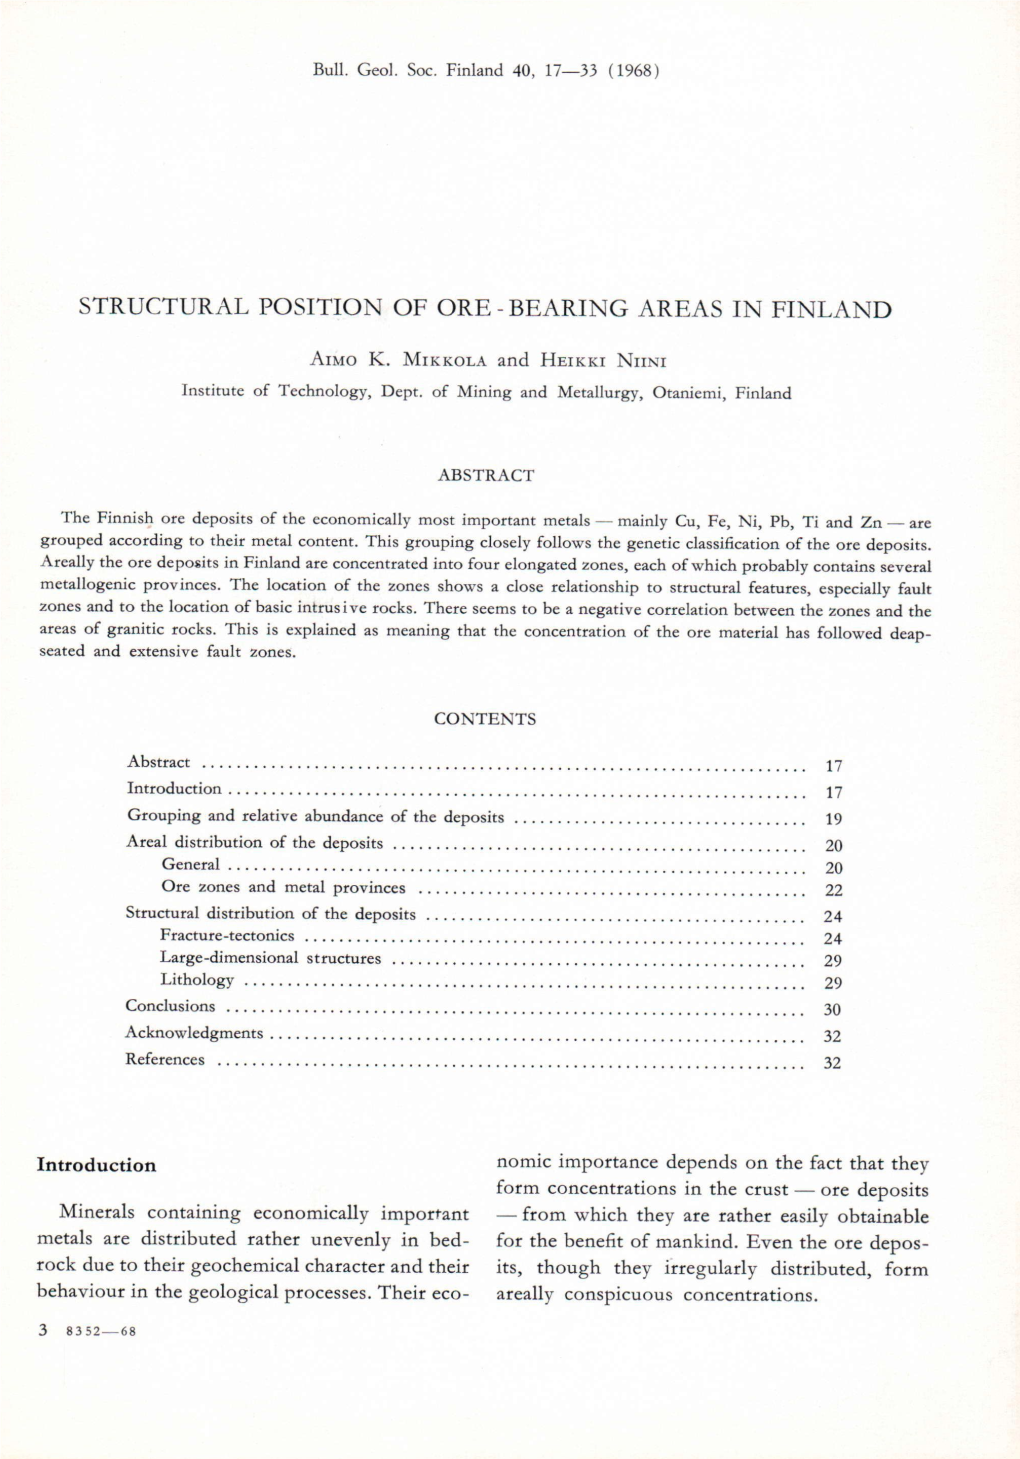 Structural Position of Ore-Bearing Areas in Finland